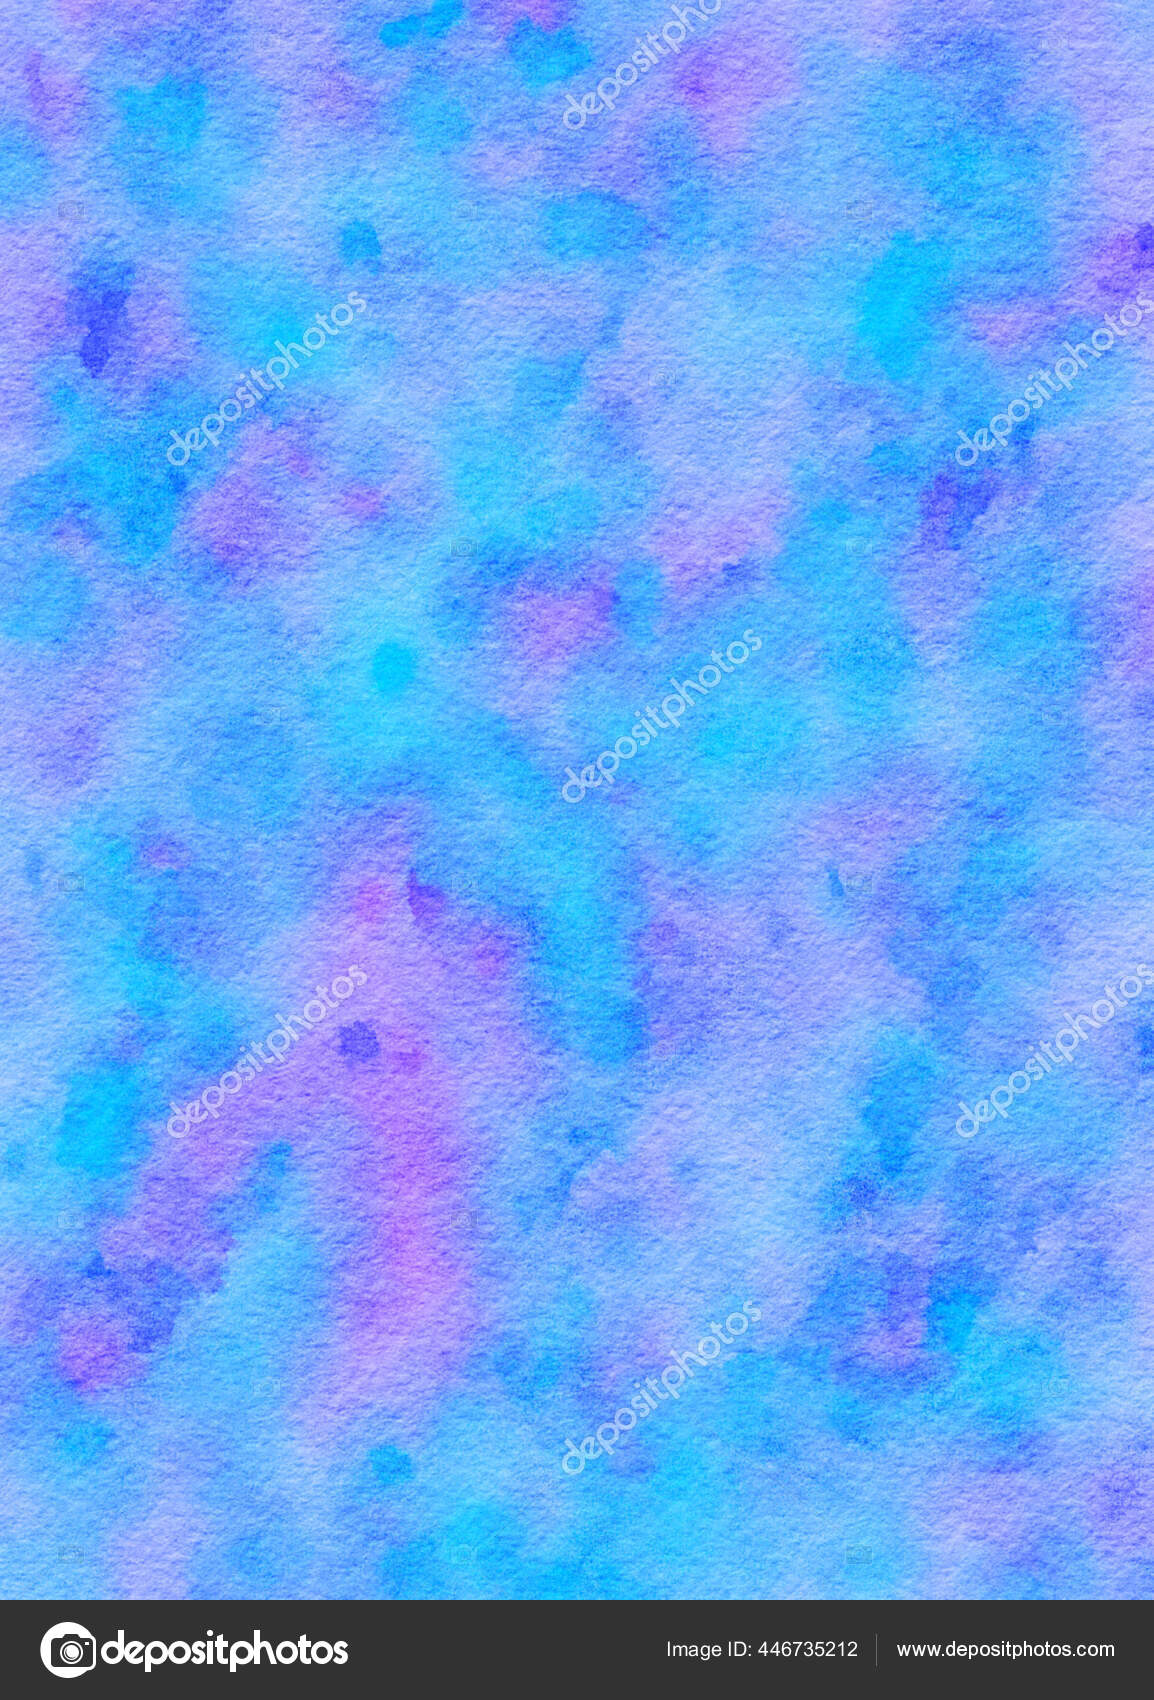 Pastel Blue Purple Tie Dye Watercolor Paper Background Image Graphic Stock  Photo by ©stephconnell 446735212